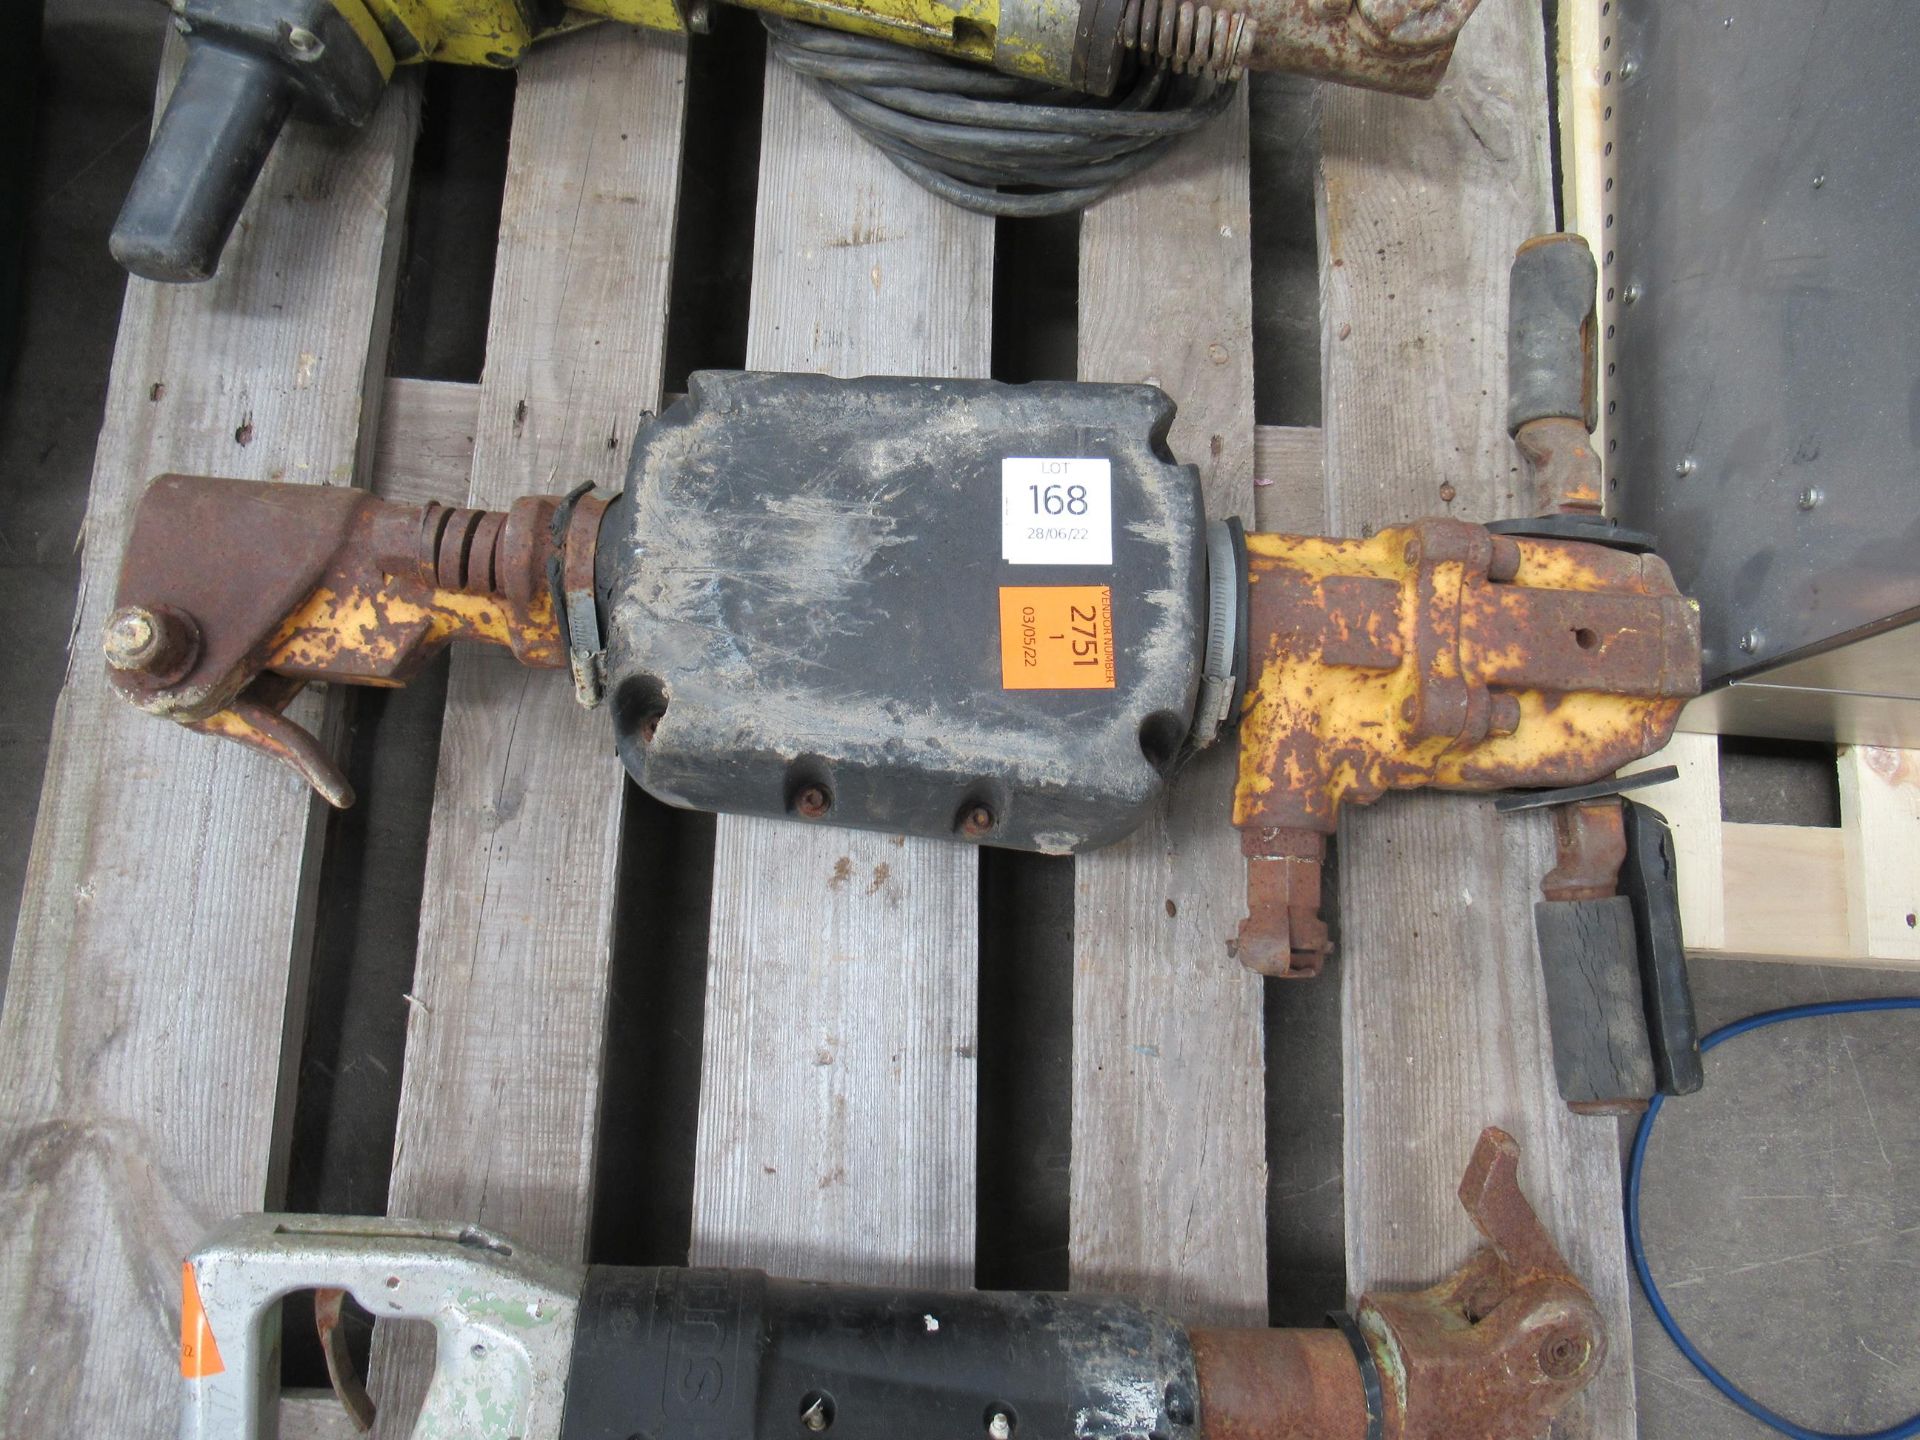 Unbranded jackhammer and another sullair jackhammer - Image 3 of 3